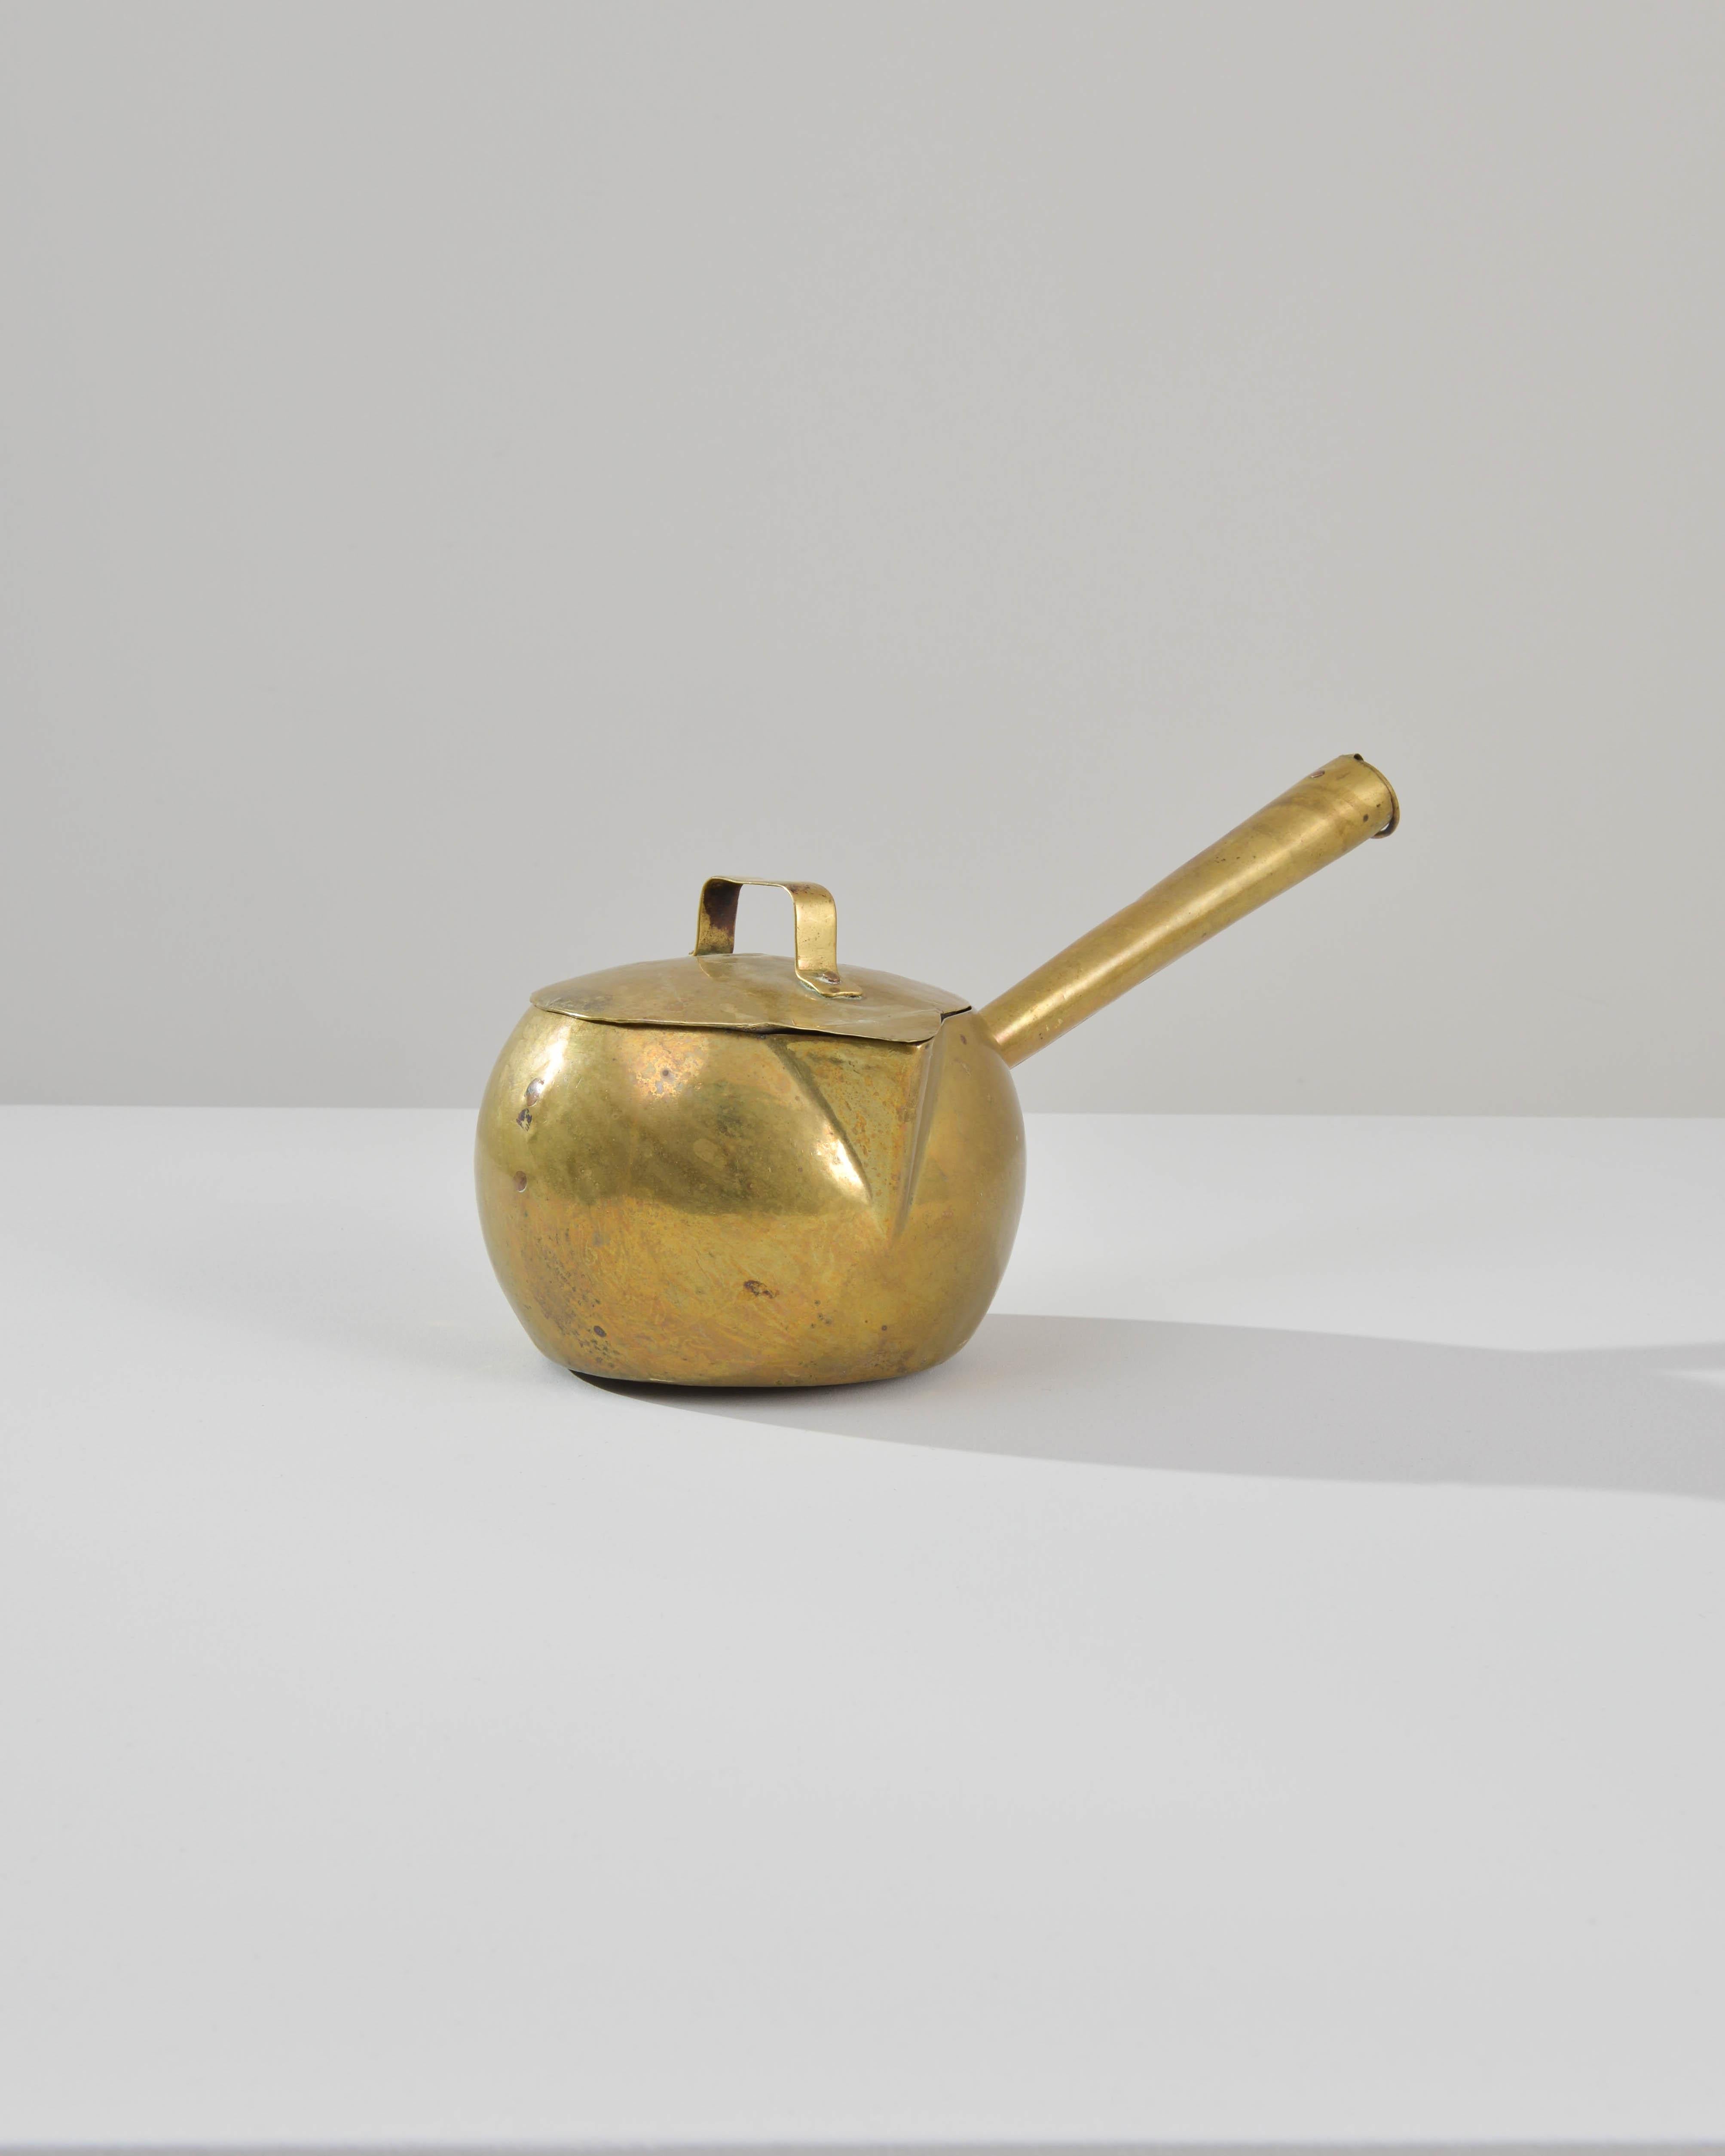 The charming shape and bright finish of this brass pot make for a delightful kitchen accent. Made in France in the 1800s, the sides of the pot are gently rounded, giving it a spherical appearance. A neat triangular spout, like the beak of a small